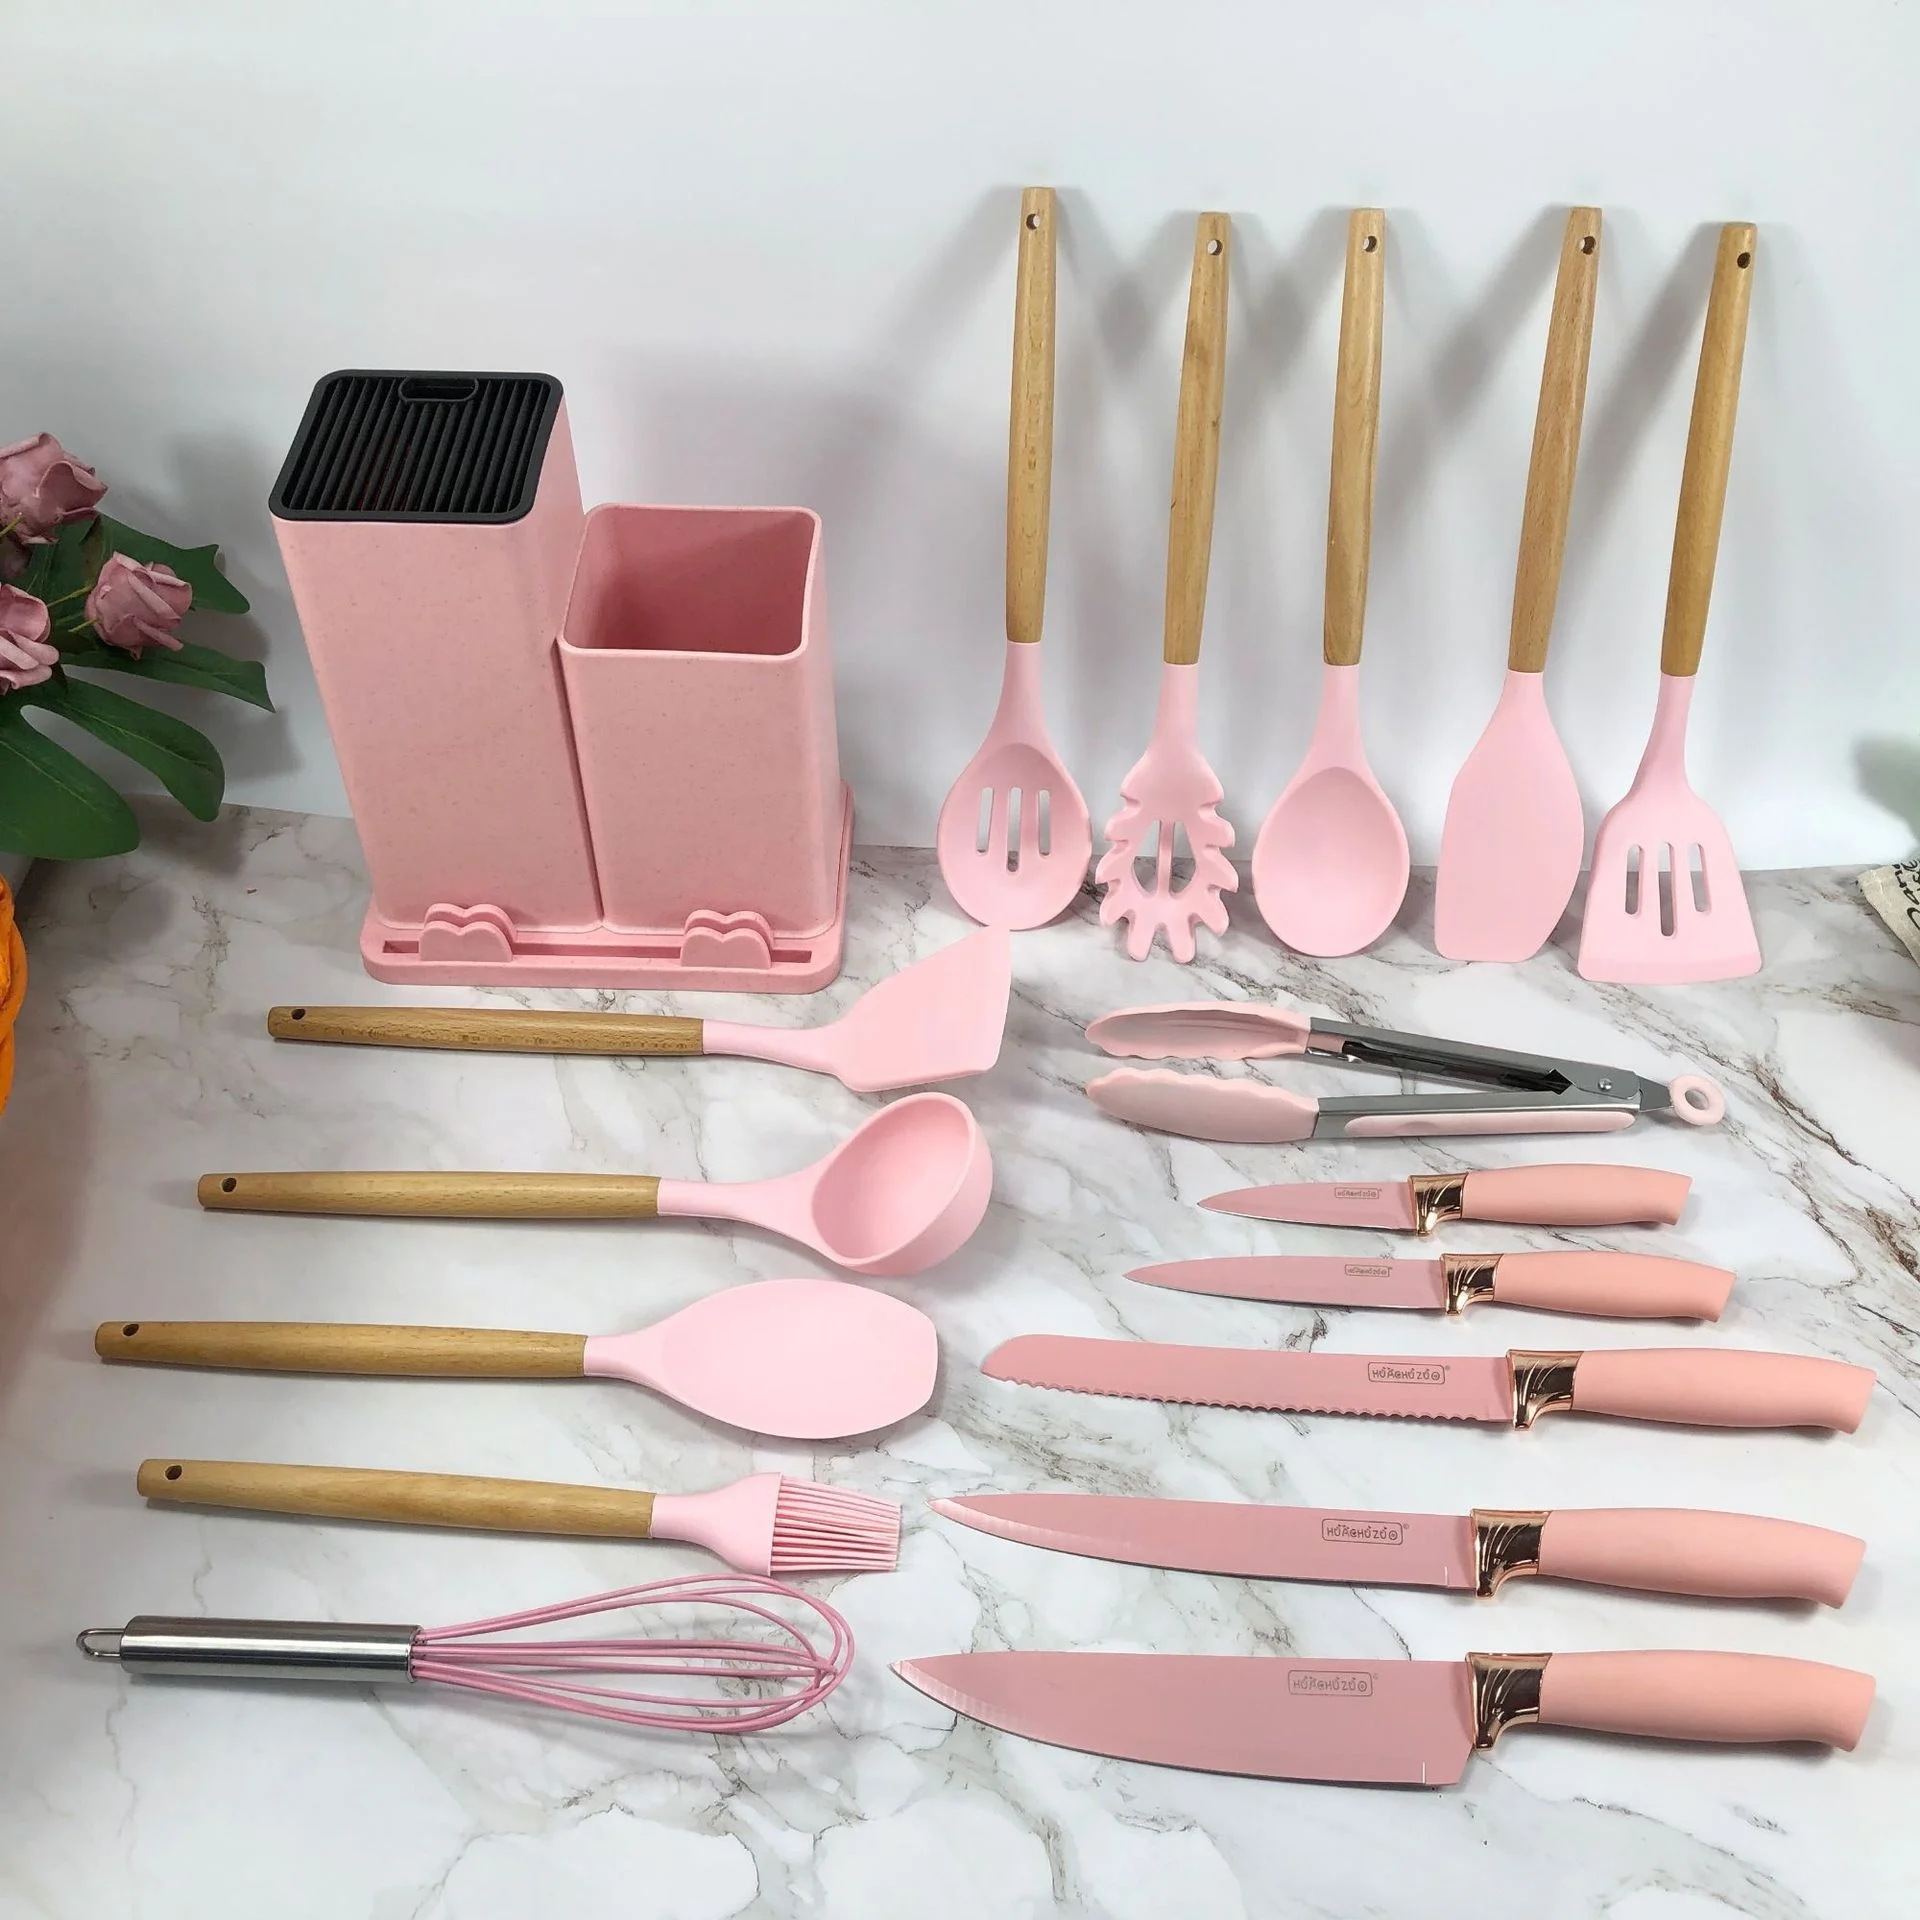 Complete kitchen Utensils Set 19pcs, Made with Premium Silicone & Wood, all  in one kitchen accessori…See more Complete kitchen Utensils Set 19pcs